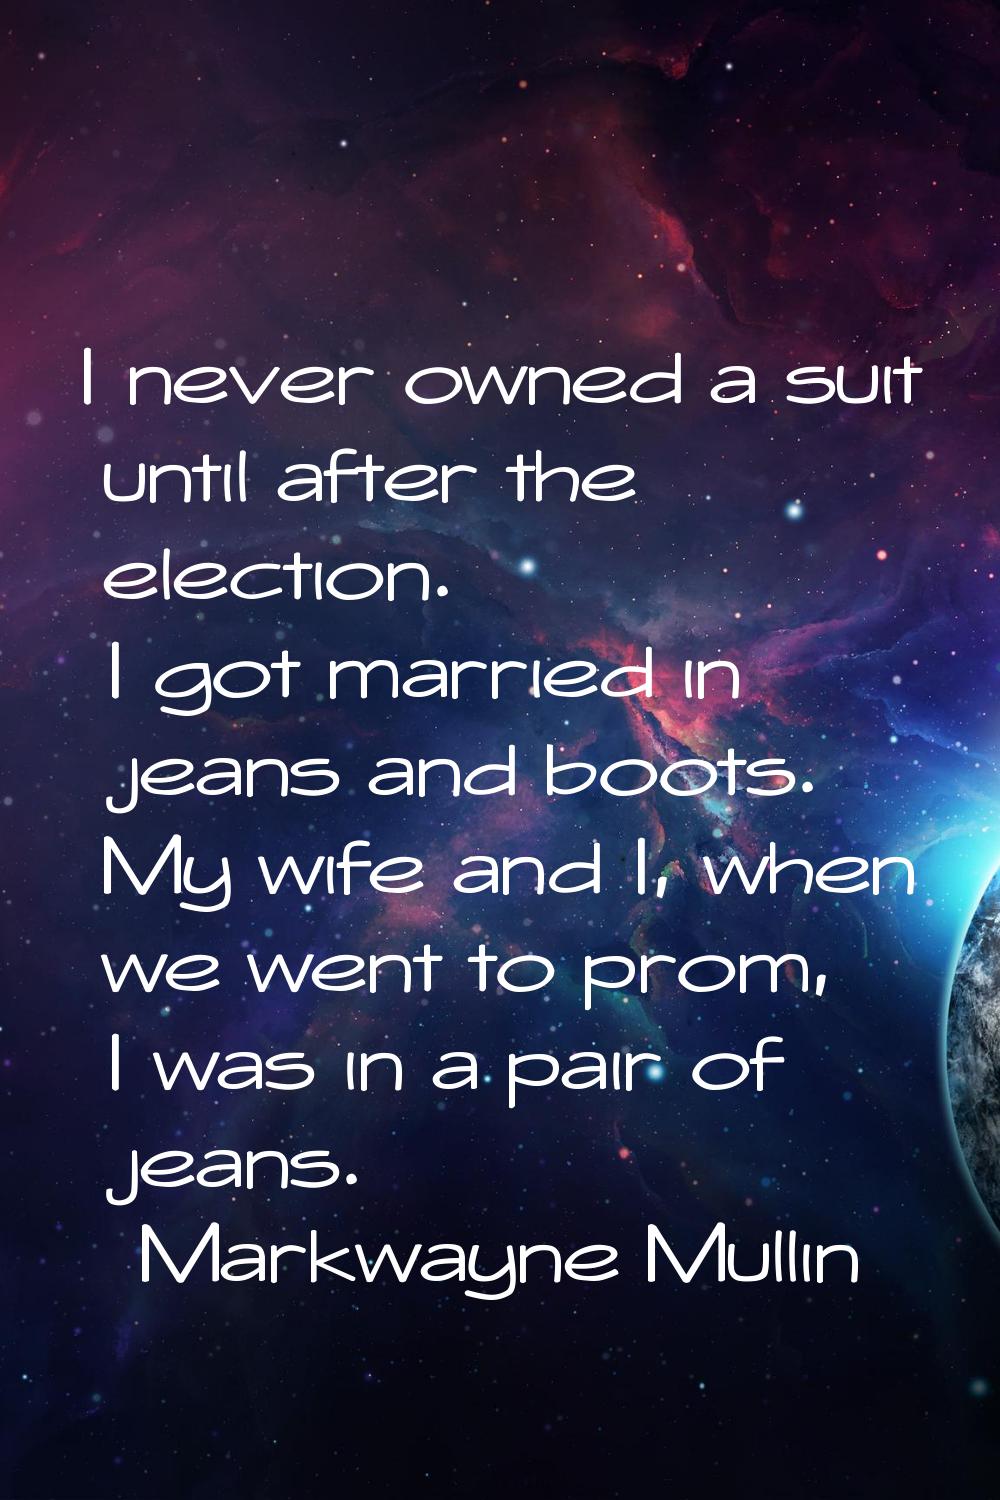 I never owned a suit until after the election. I got married in jeans and boots. My wife and I, whe